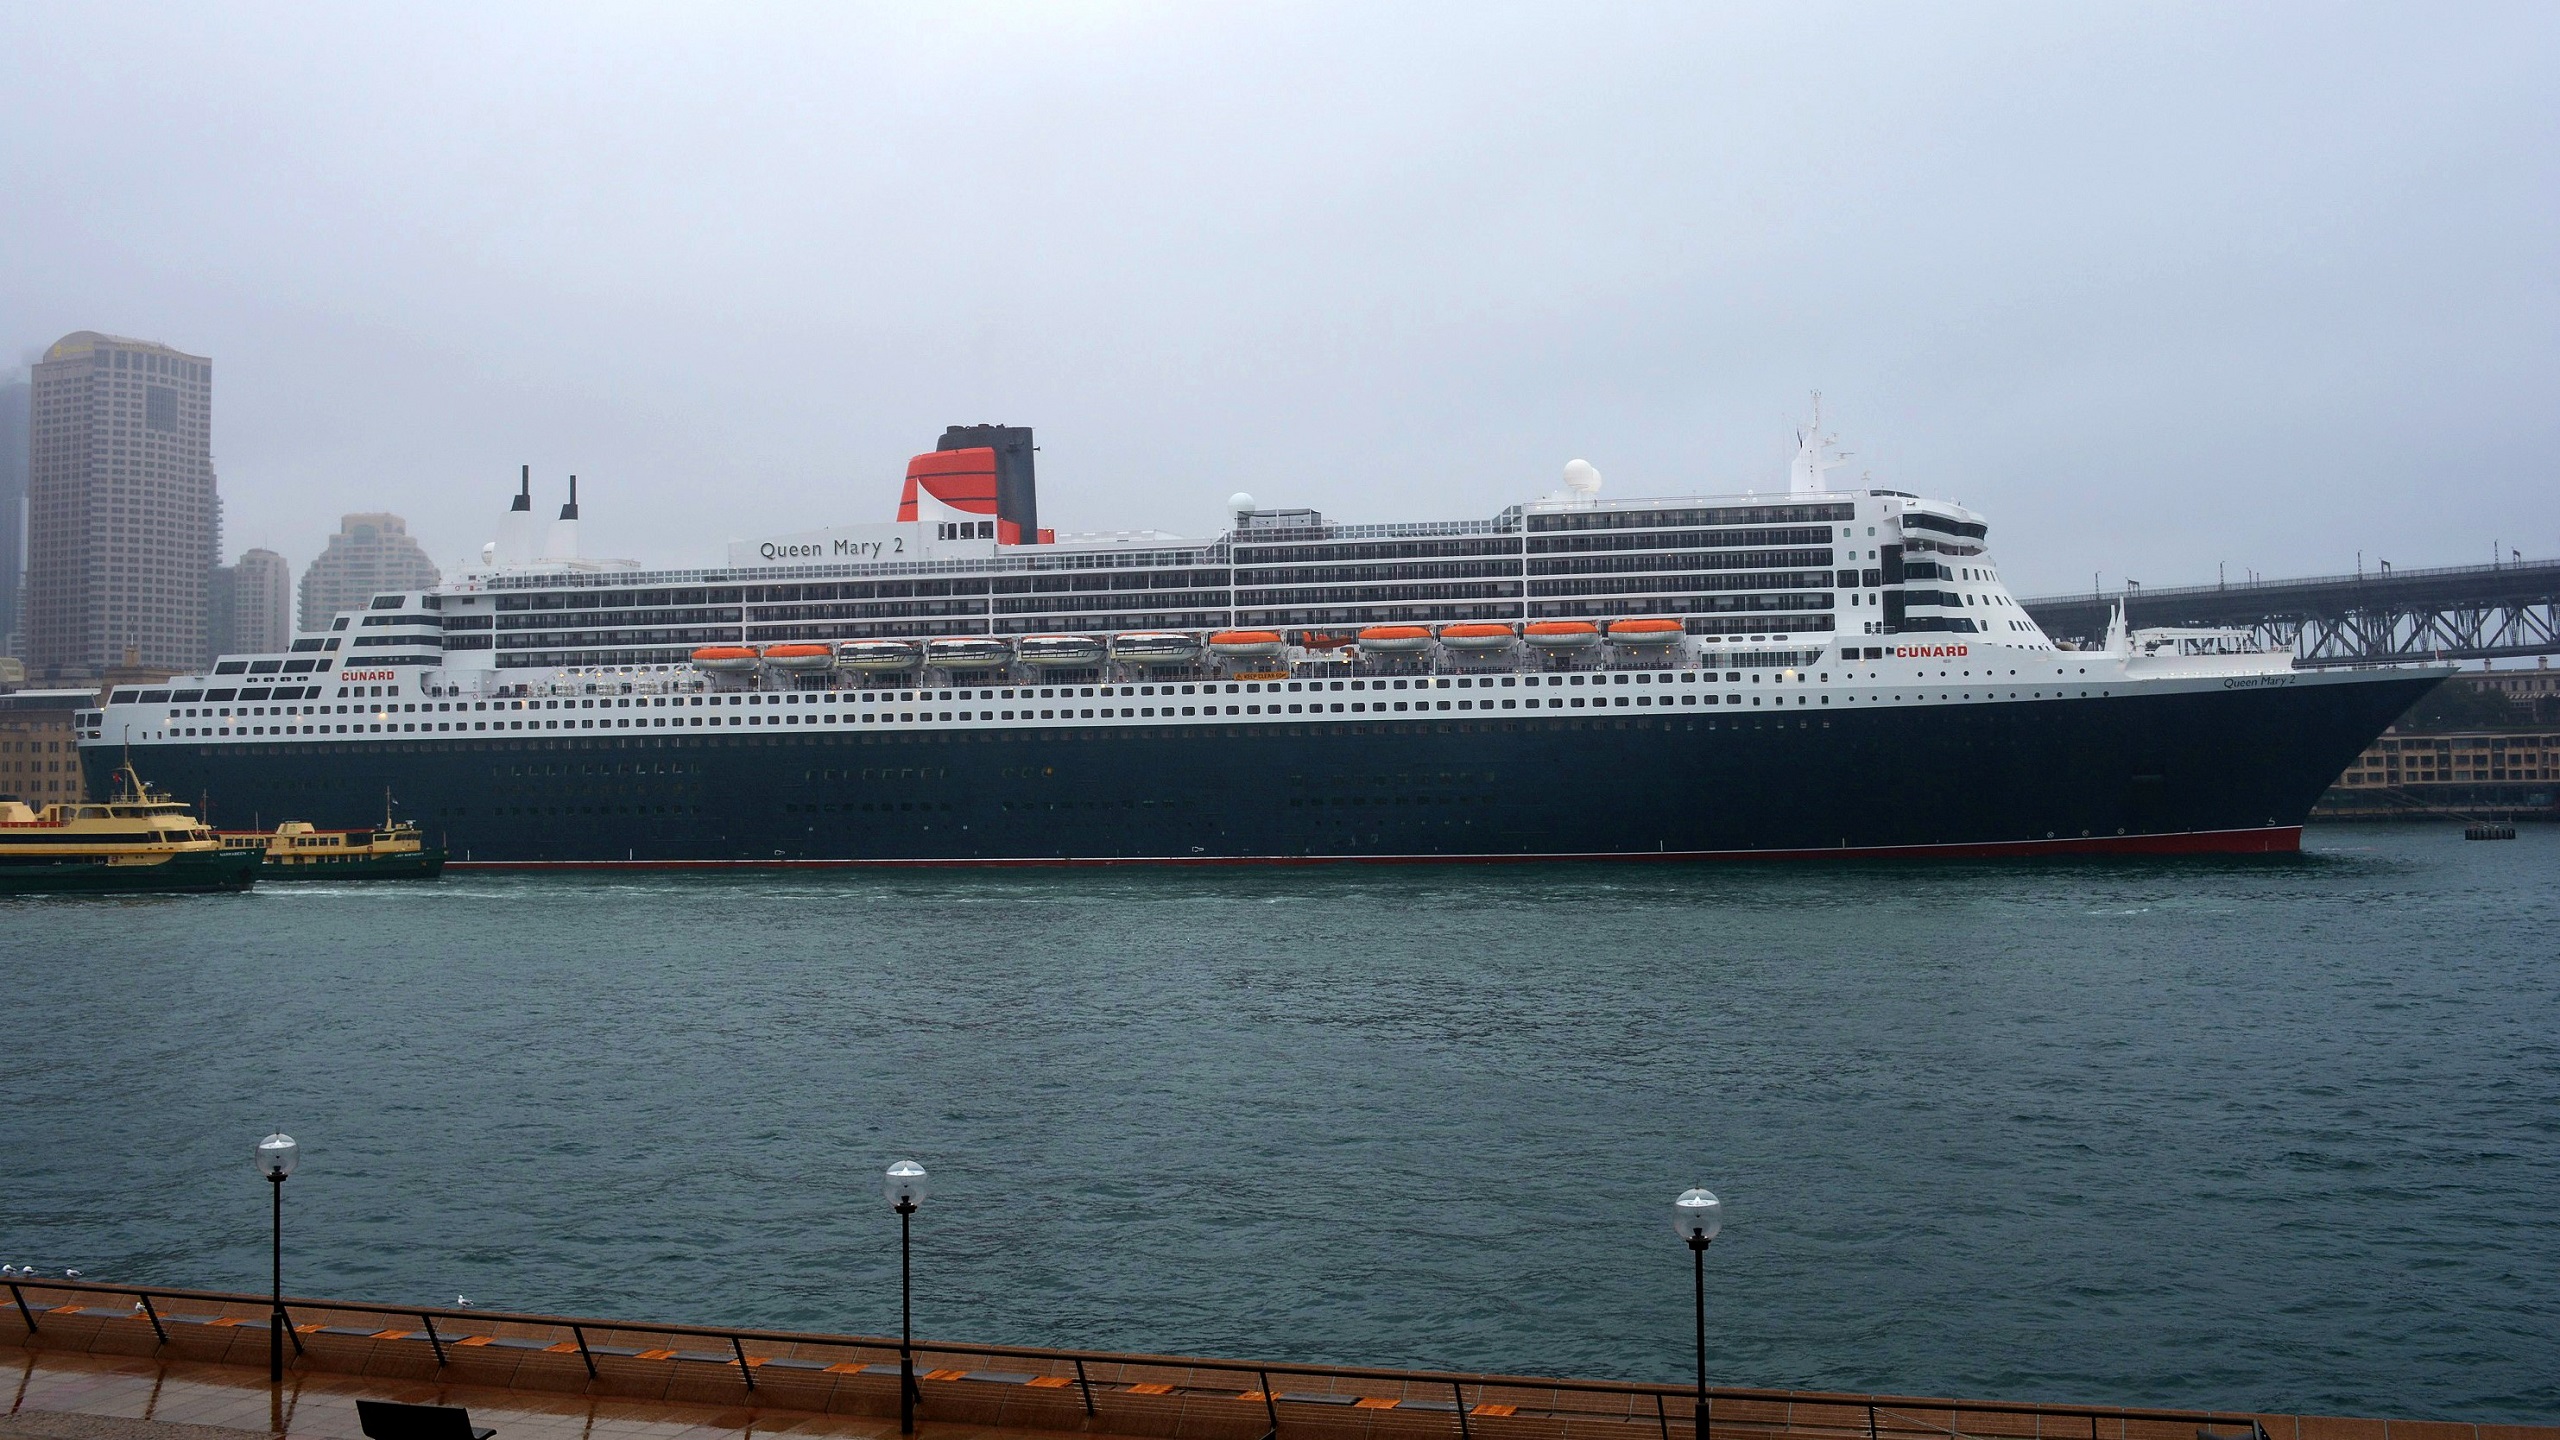 vehicles, rms queen mary 2, australia, cruise ship, ocean liner, ship, sydney harbour